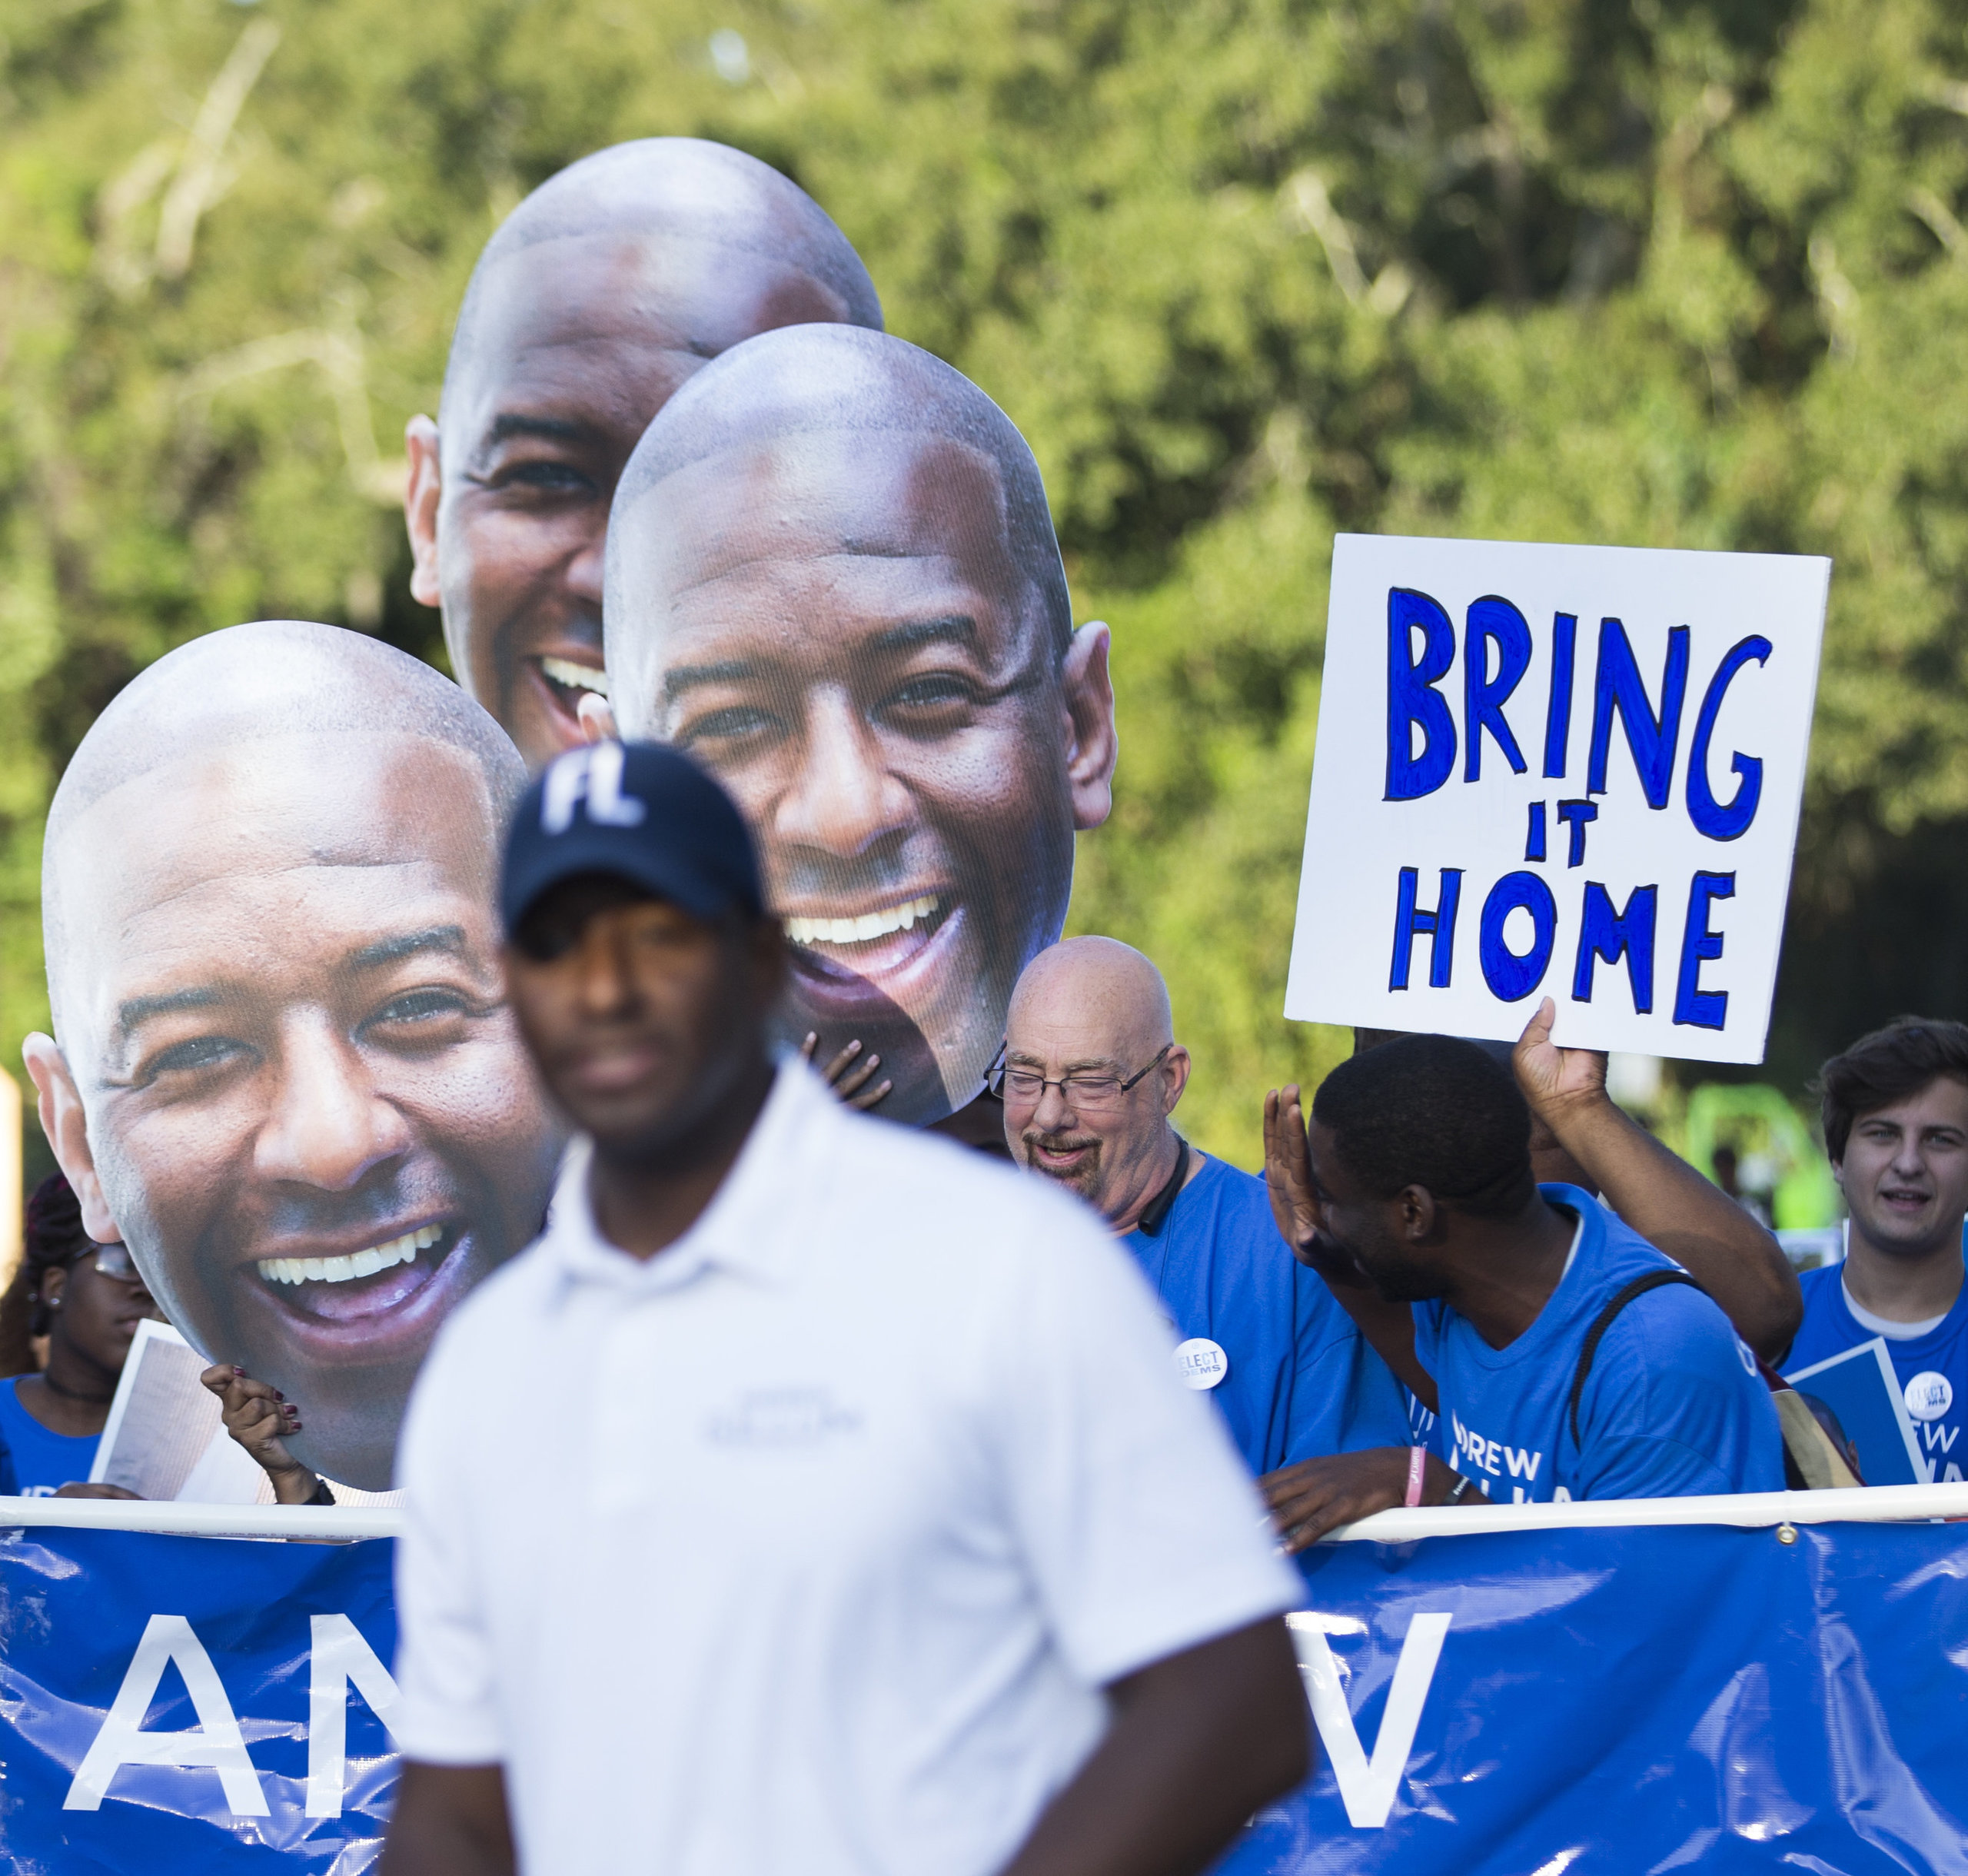 Gillum's slogan, "Bring it home," is based in an ideal instilled in him by his maternal grandmother.